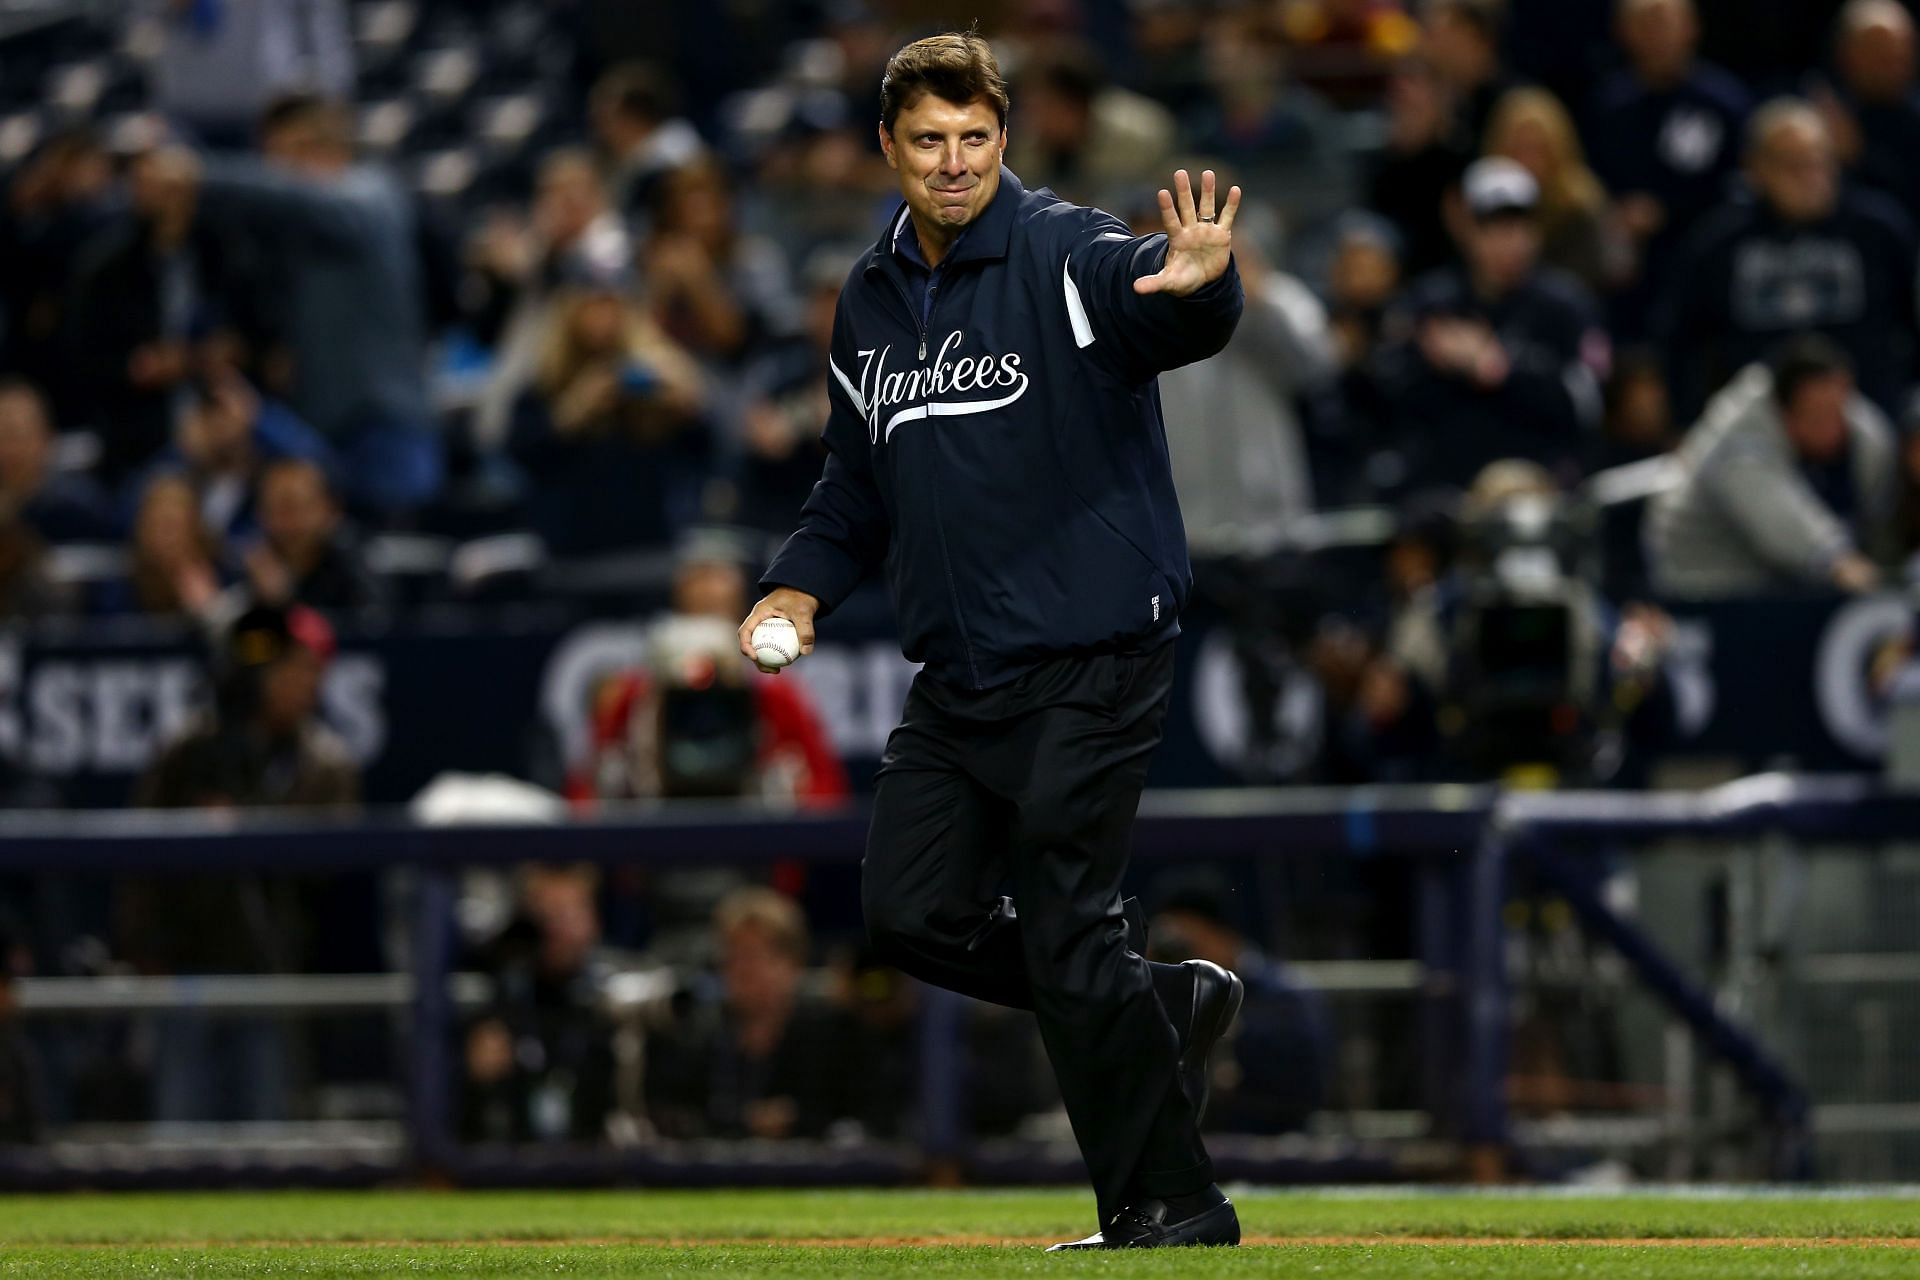 Tino Martinez sees 'same mindset' in current Yankees as 1998 team